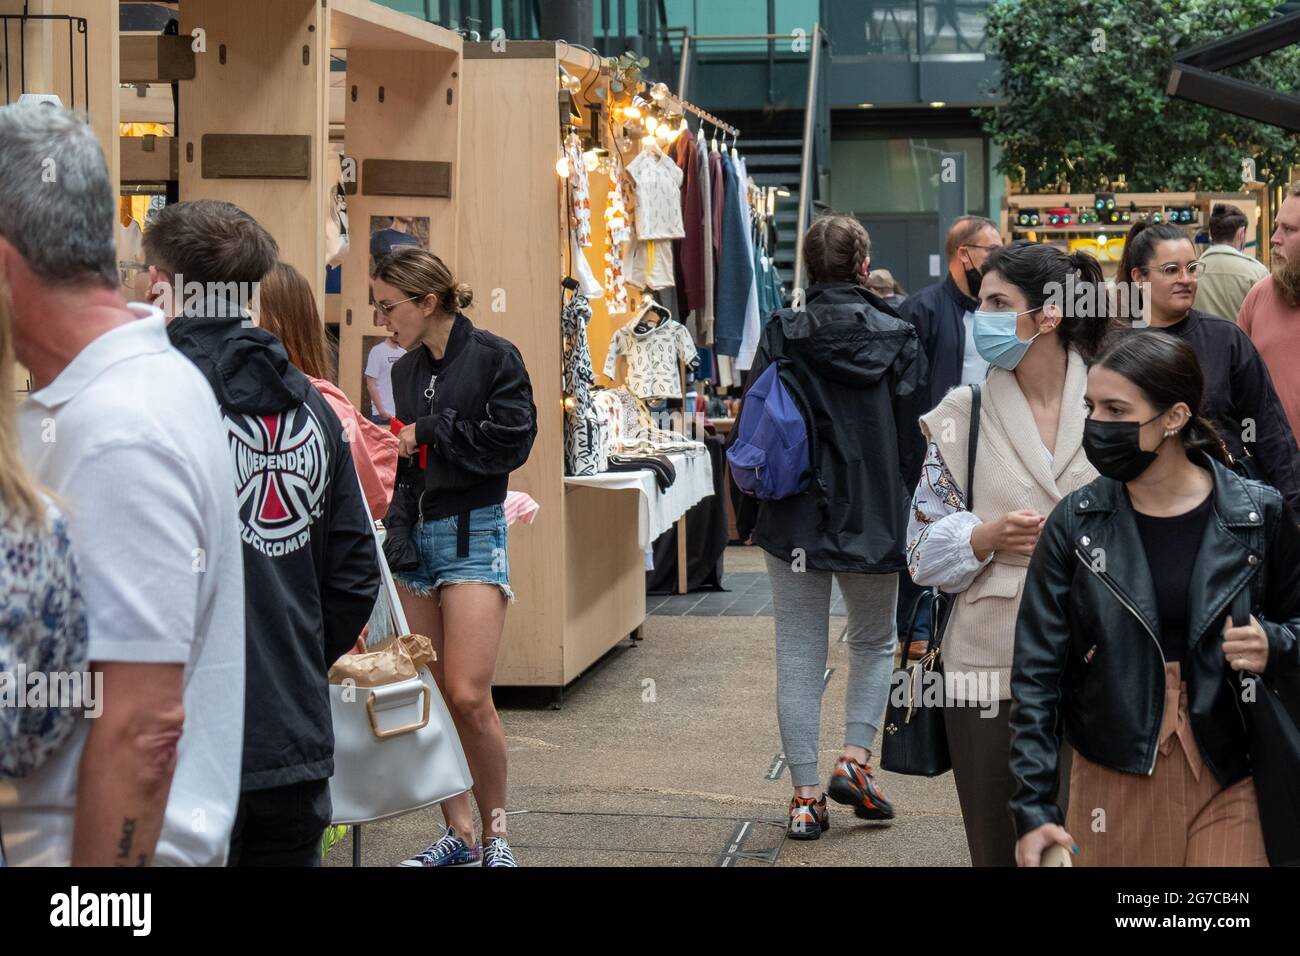 London- July, 2021: Food stalls inside Spitalfields Market.  A popular market with food, bars, arts and crafts Stock Photo